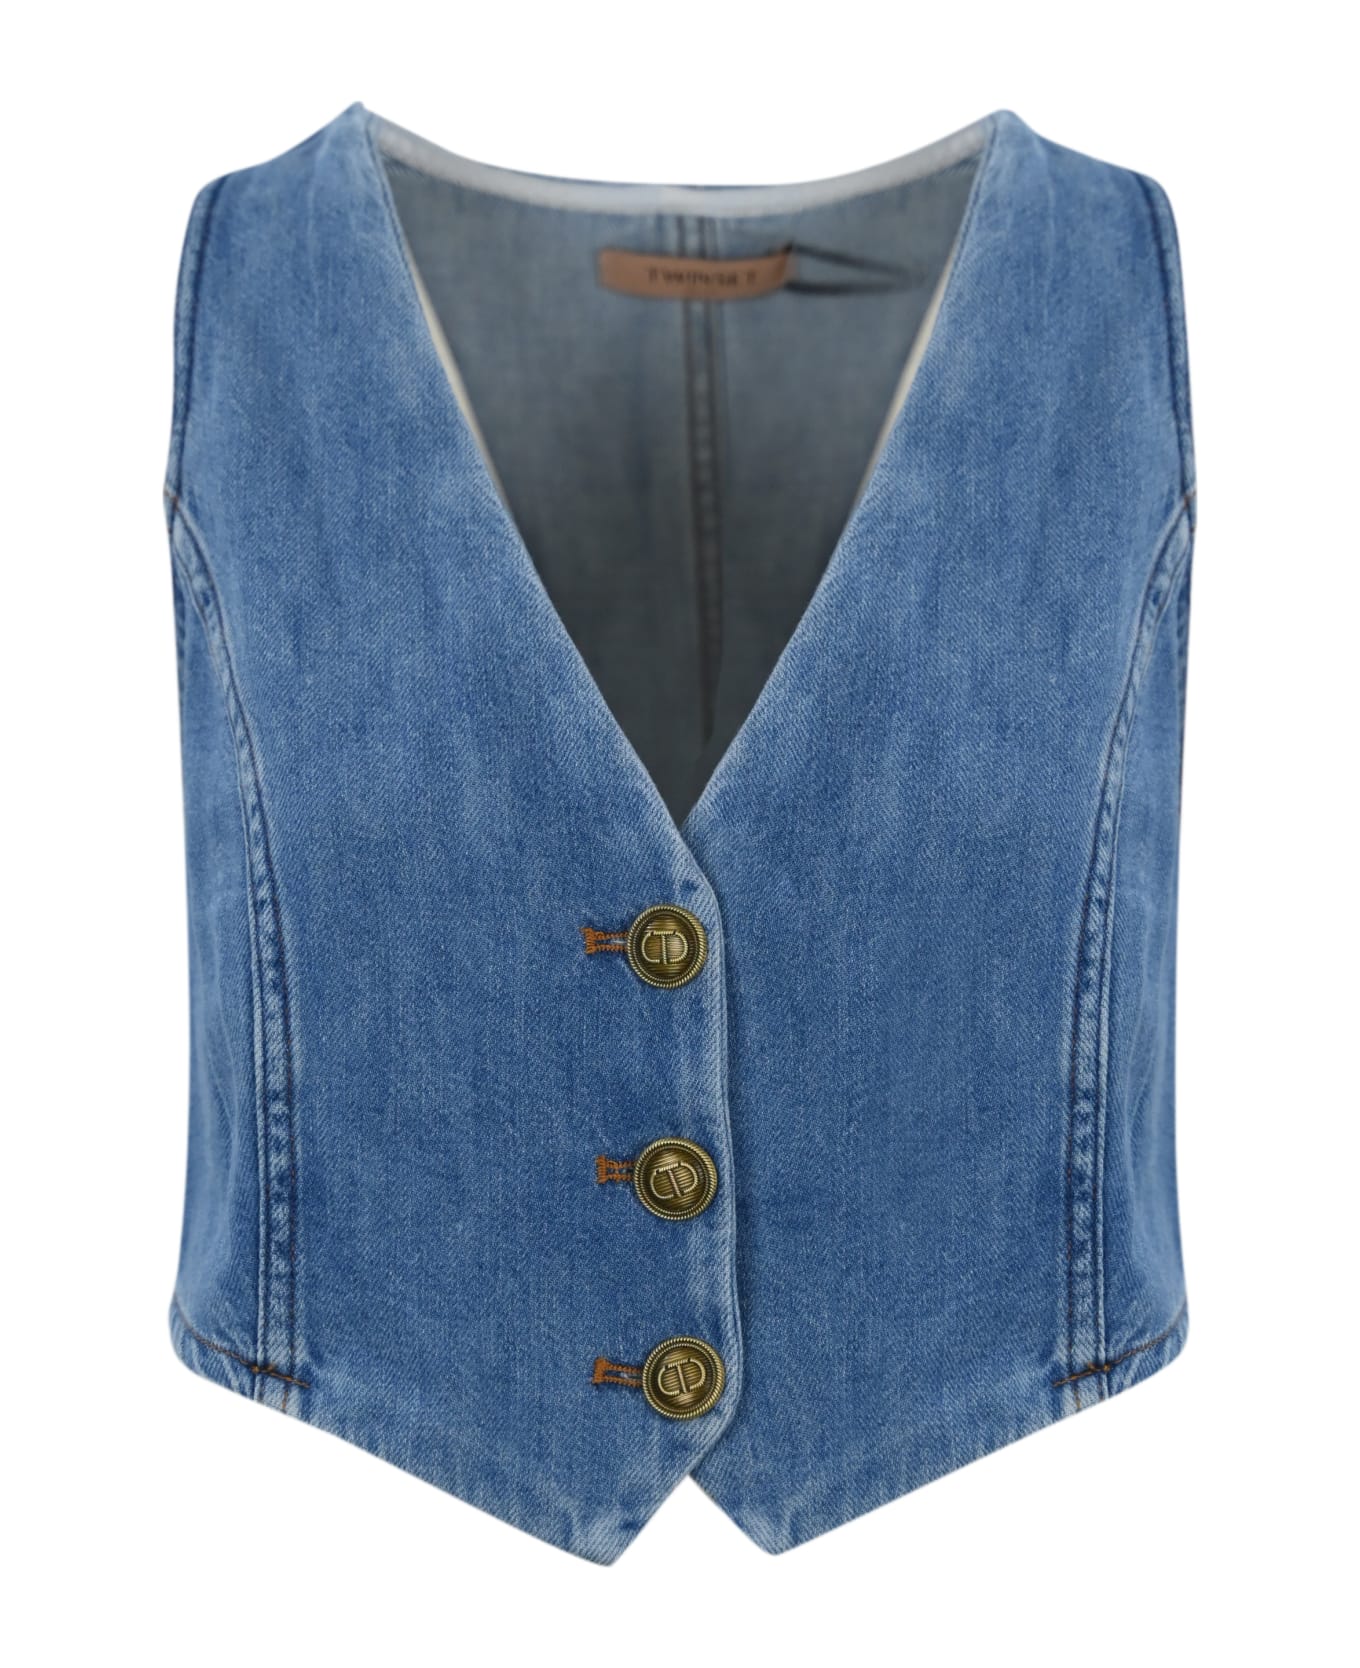 TwinSet Denim Vest With Buttons - Stone Washed